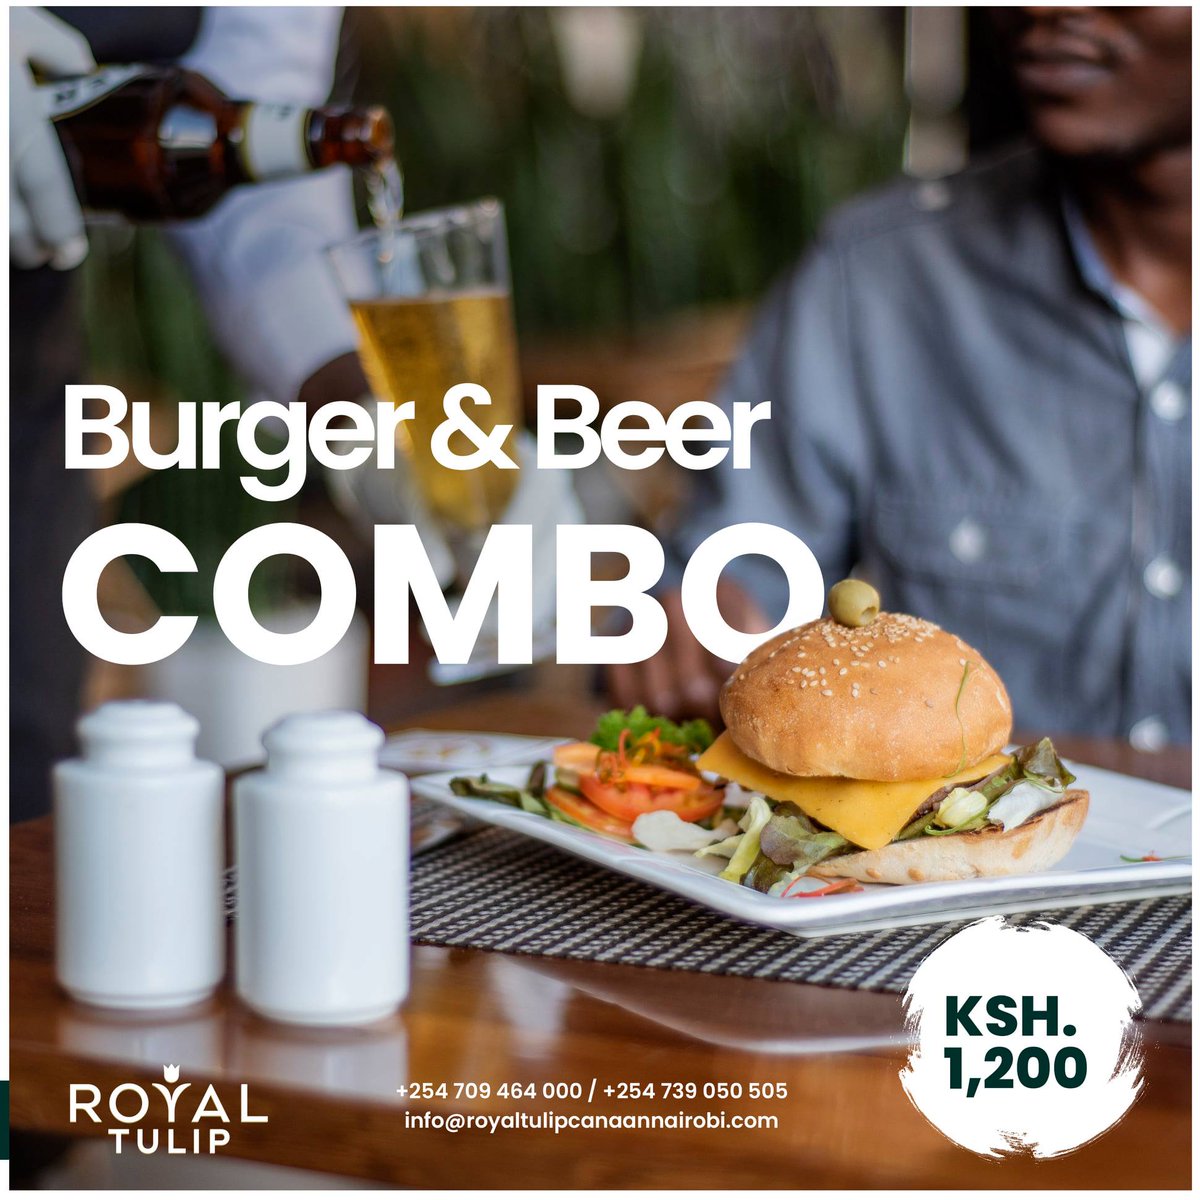 Better still why not have one for the road on a full belly?

#burger
#nairobiburgers
#burgercombo
#combos
#nairobihotels
#LunchTime